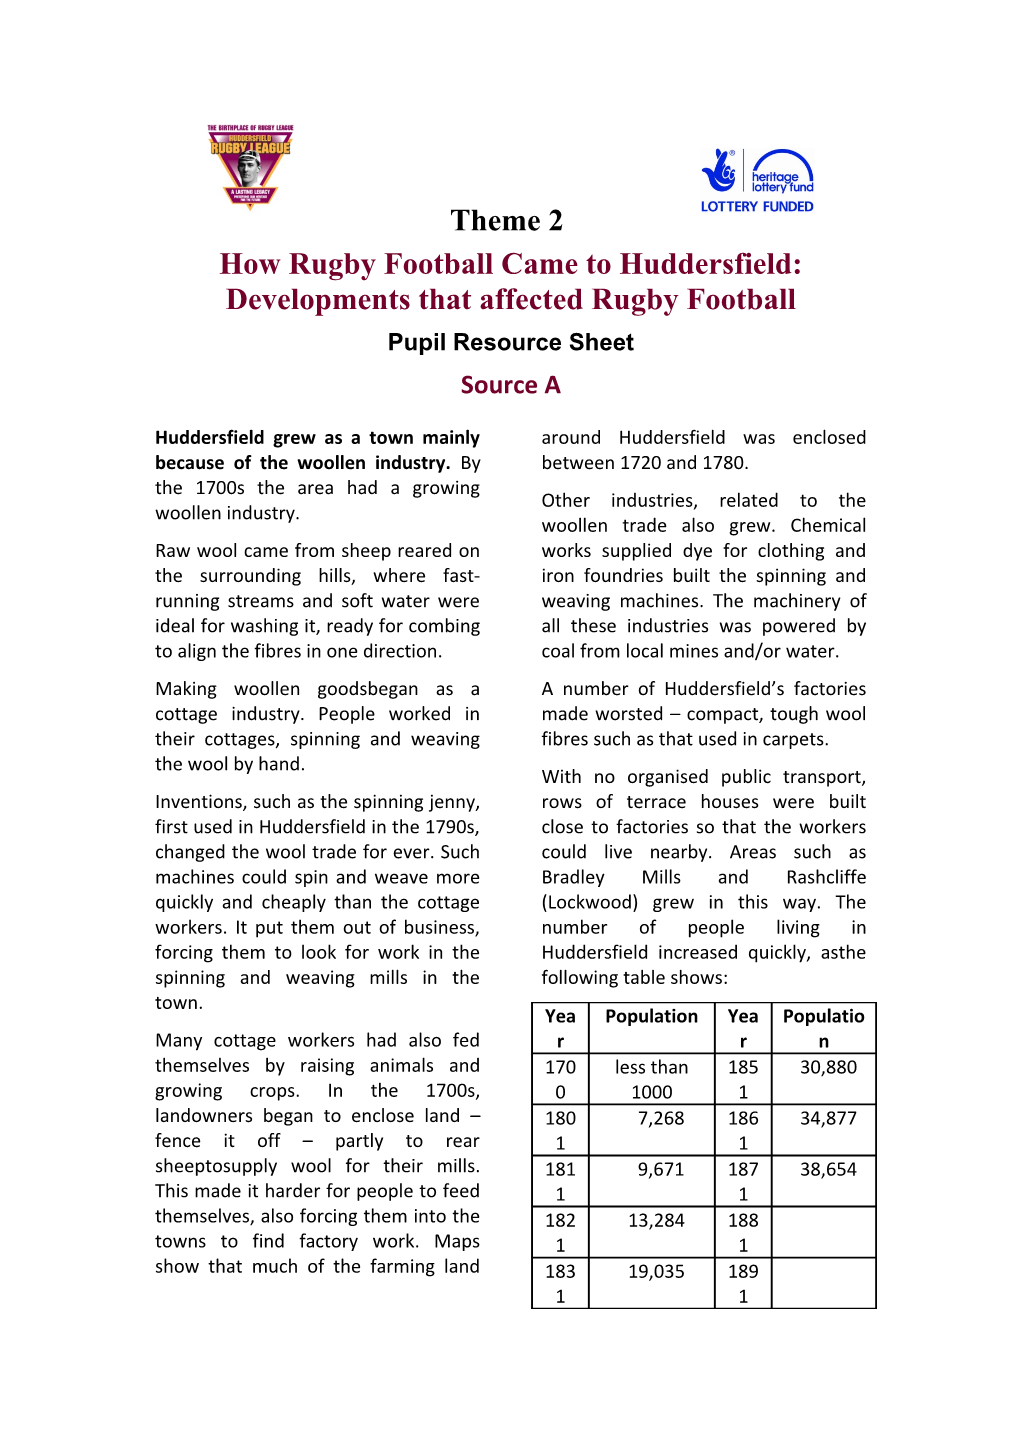 How Rugby Football Came to Huddersfield